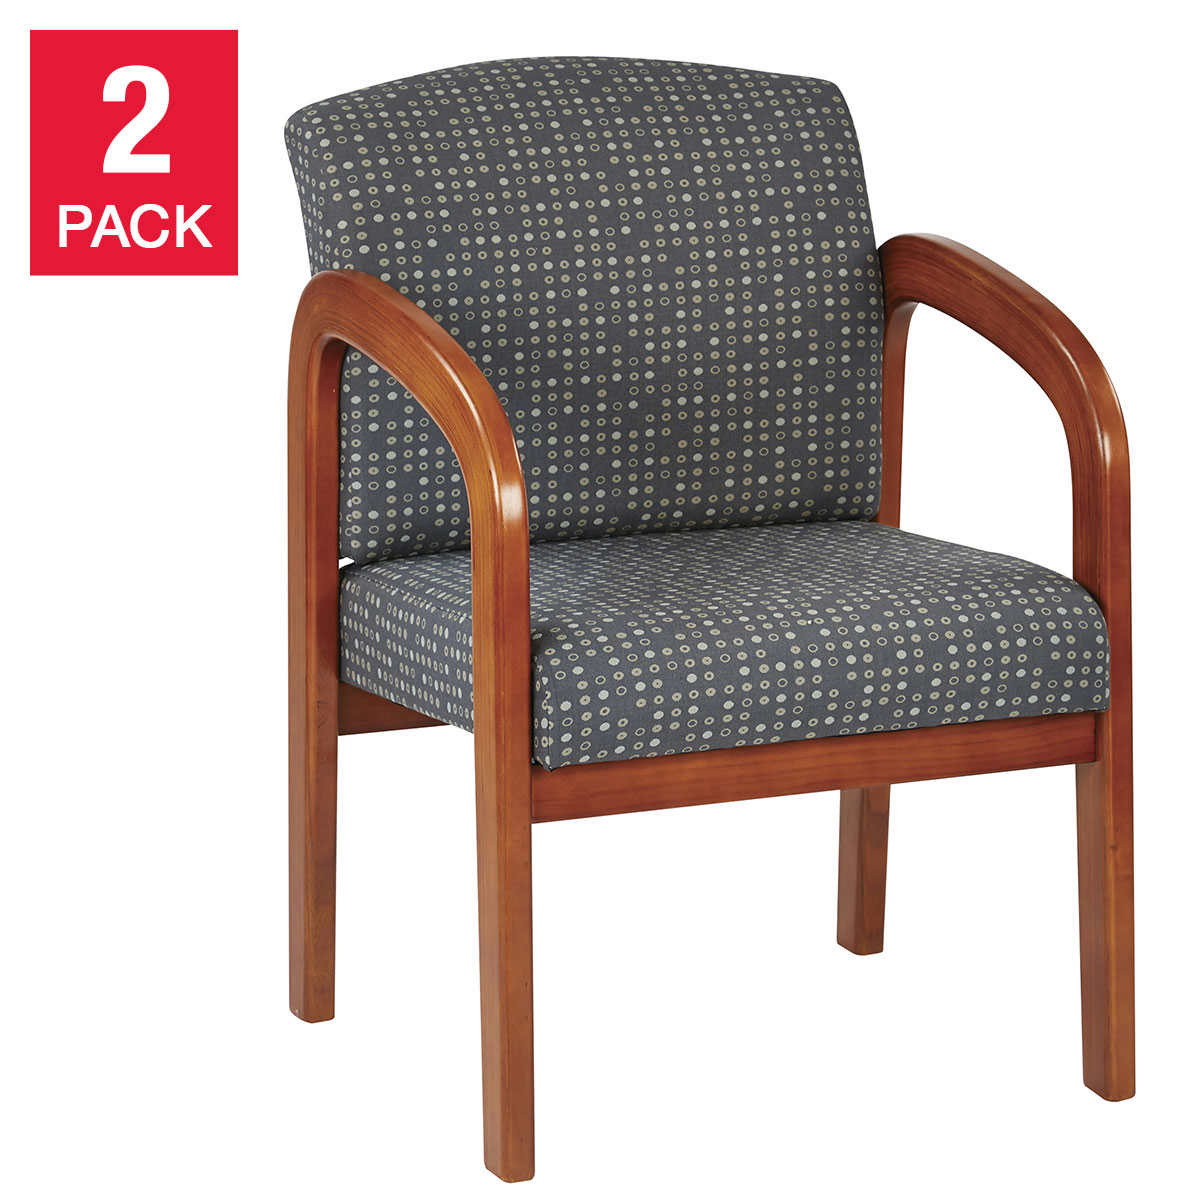 Office Star Oak Finish Reception Chairs 2 Pack